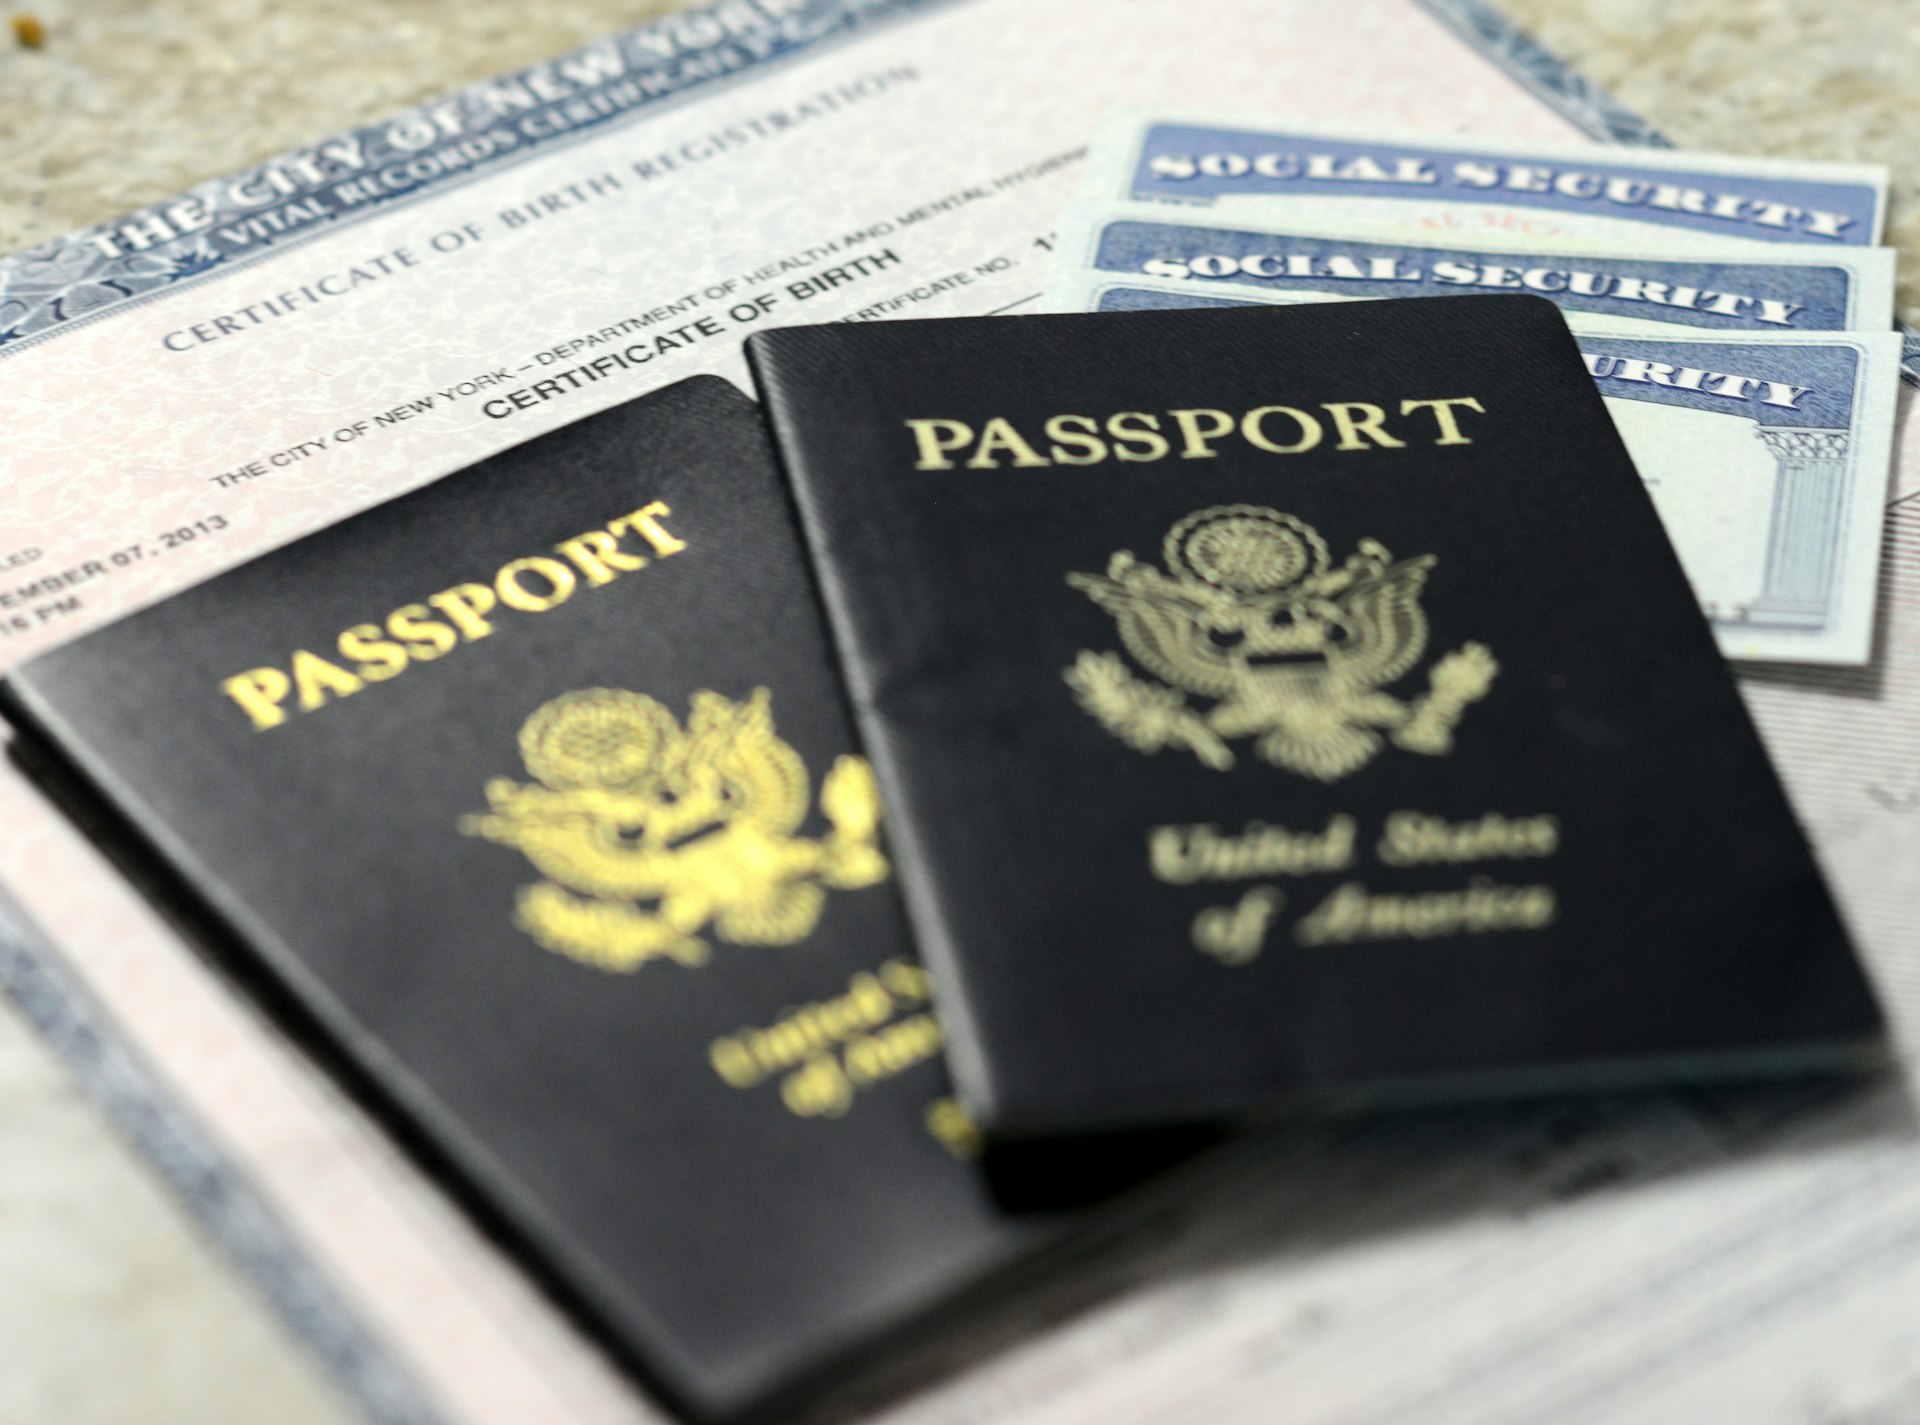 Social Security cards and US passports